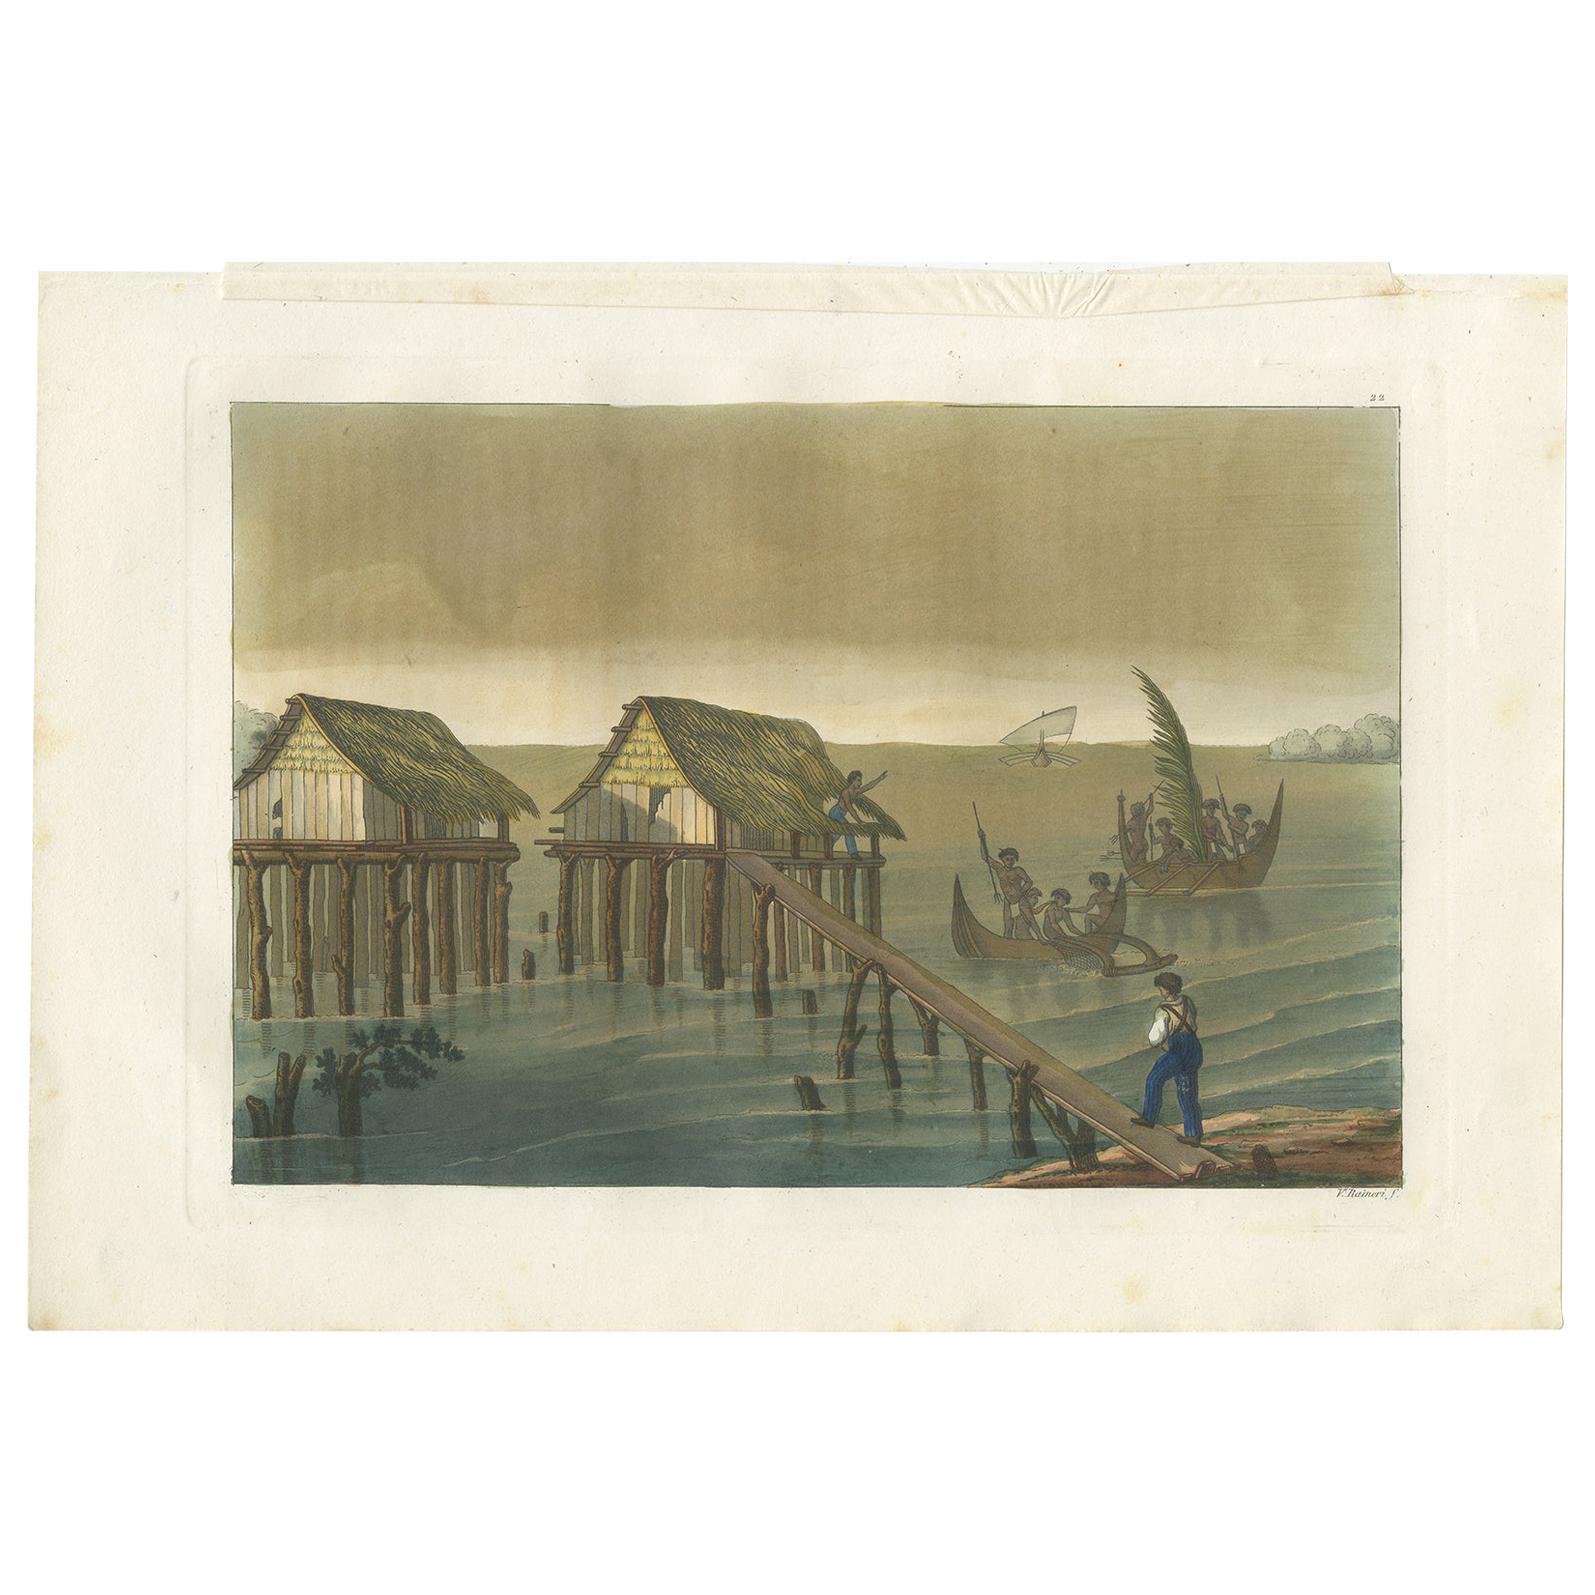 Antique Print of Papuan Houses by Ferrario, '1831'